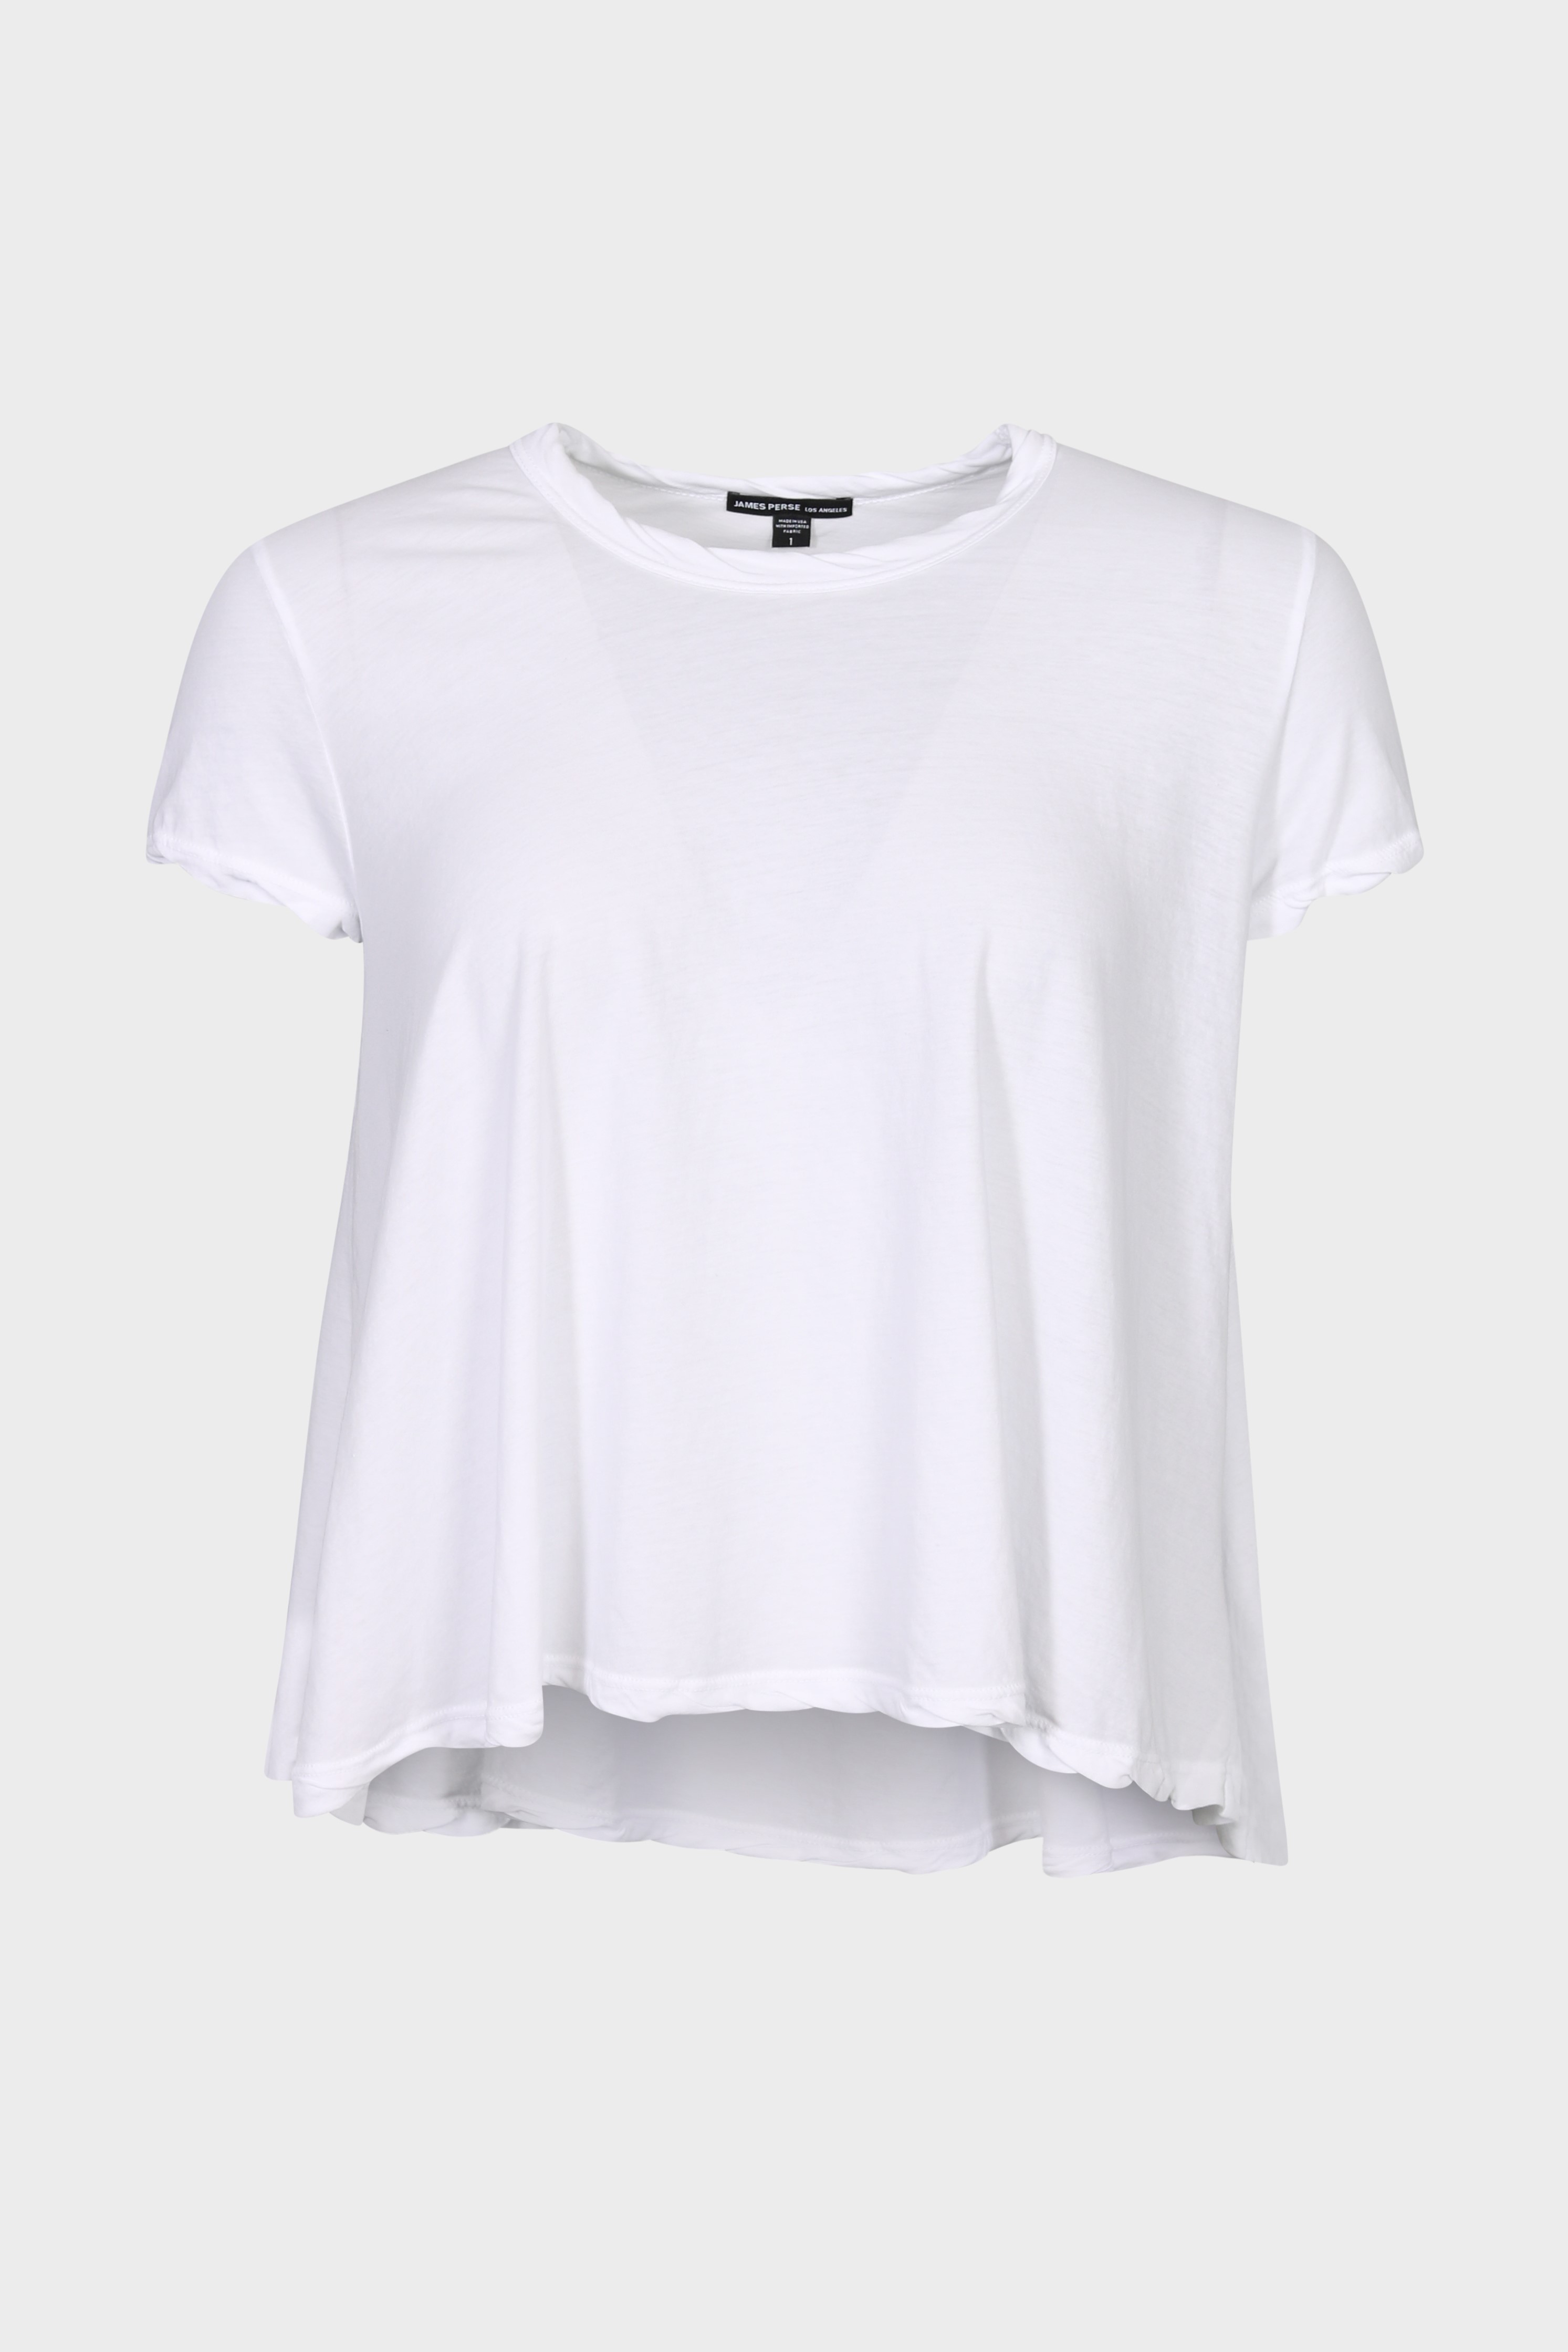 JAMES PERSE High Gauge A-Line T-Shirt in White